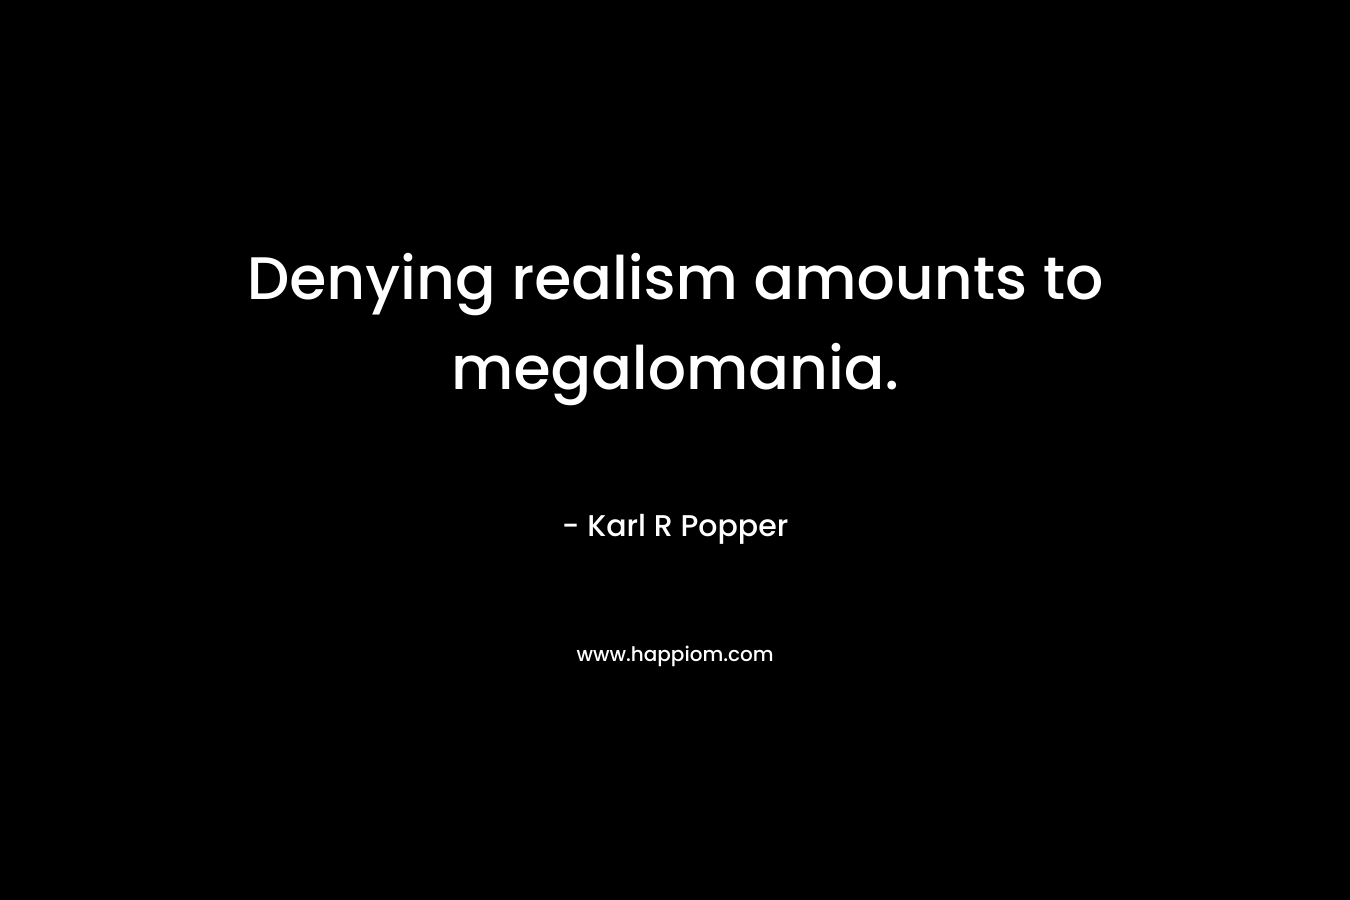 Denying realism amounts to megalomania. – Karl R Popper